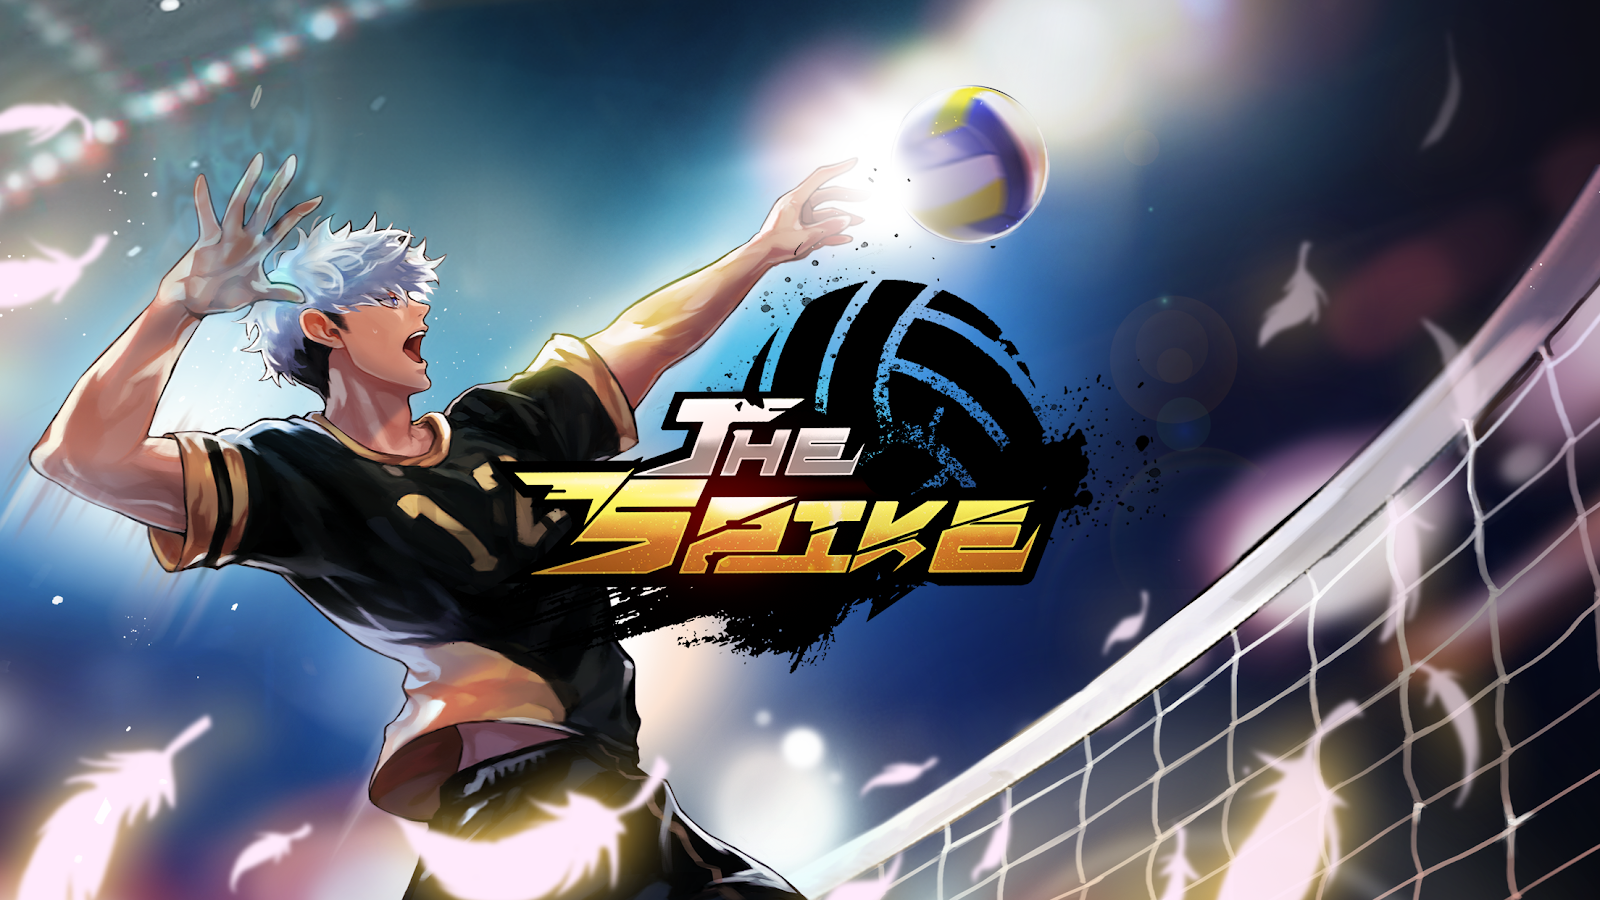 Игра the Spike. The Spike Volleyball игра. The Spike Volleyball story. Nishikawa волейбол the Spike.